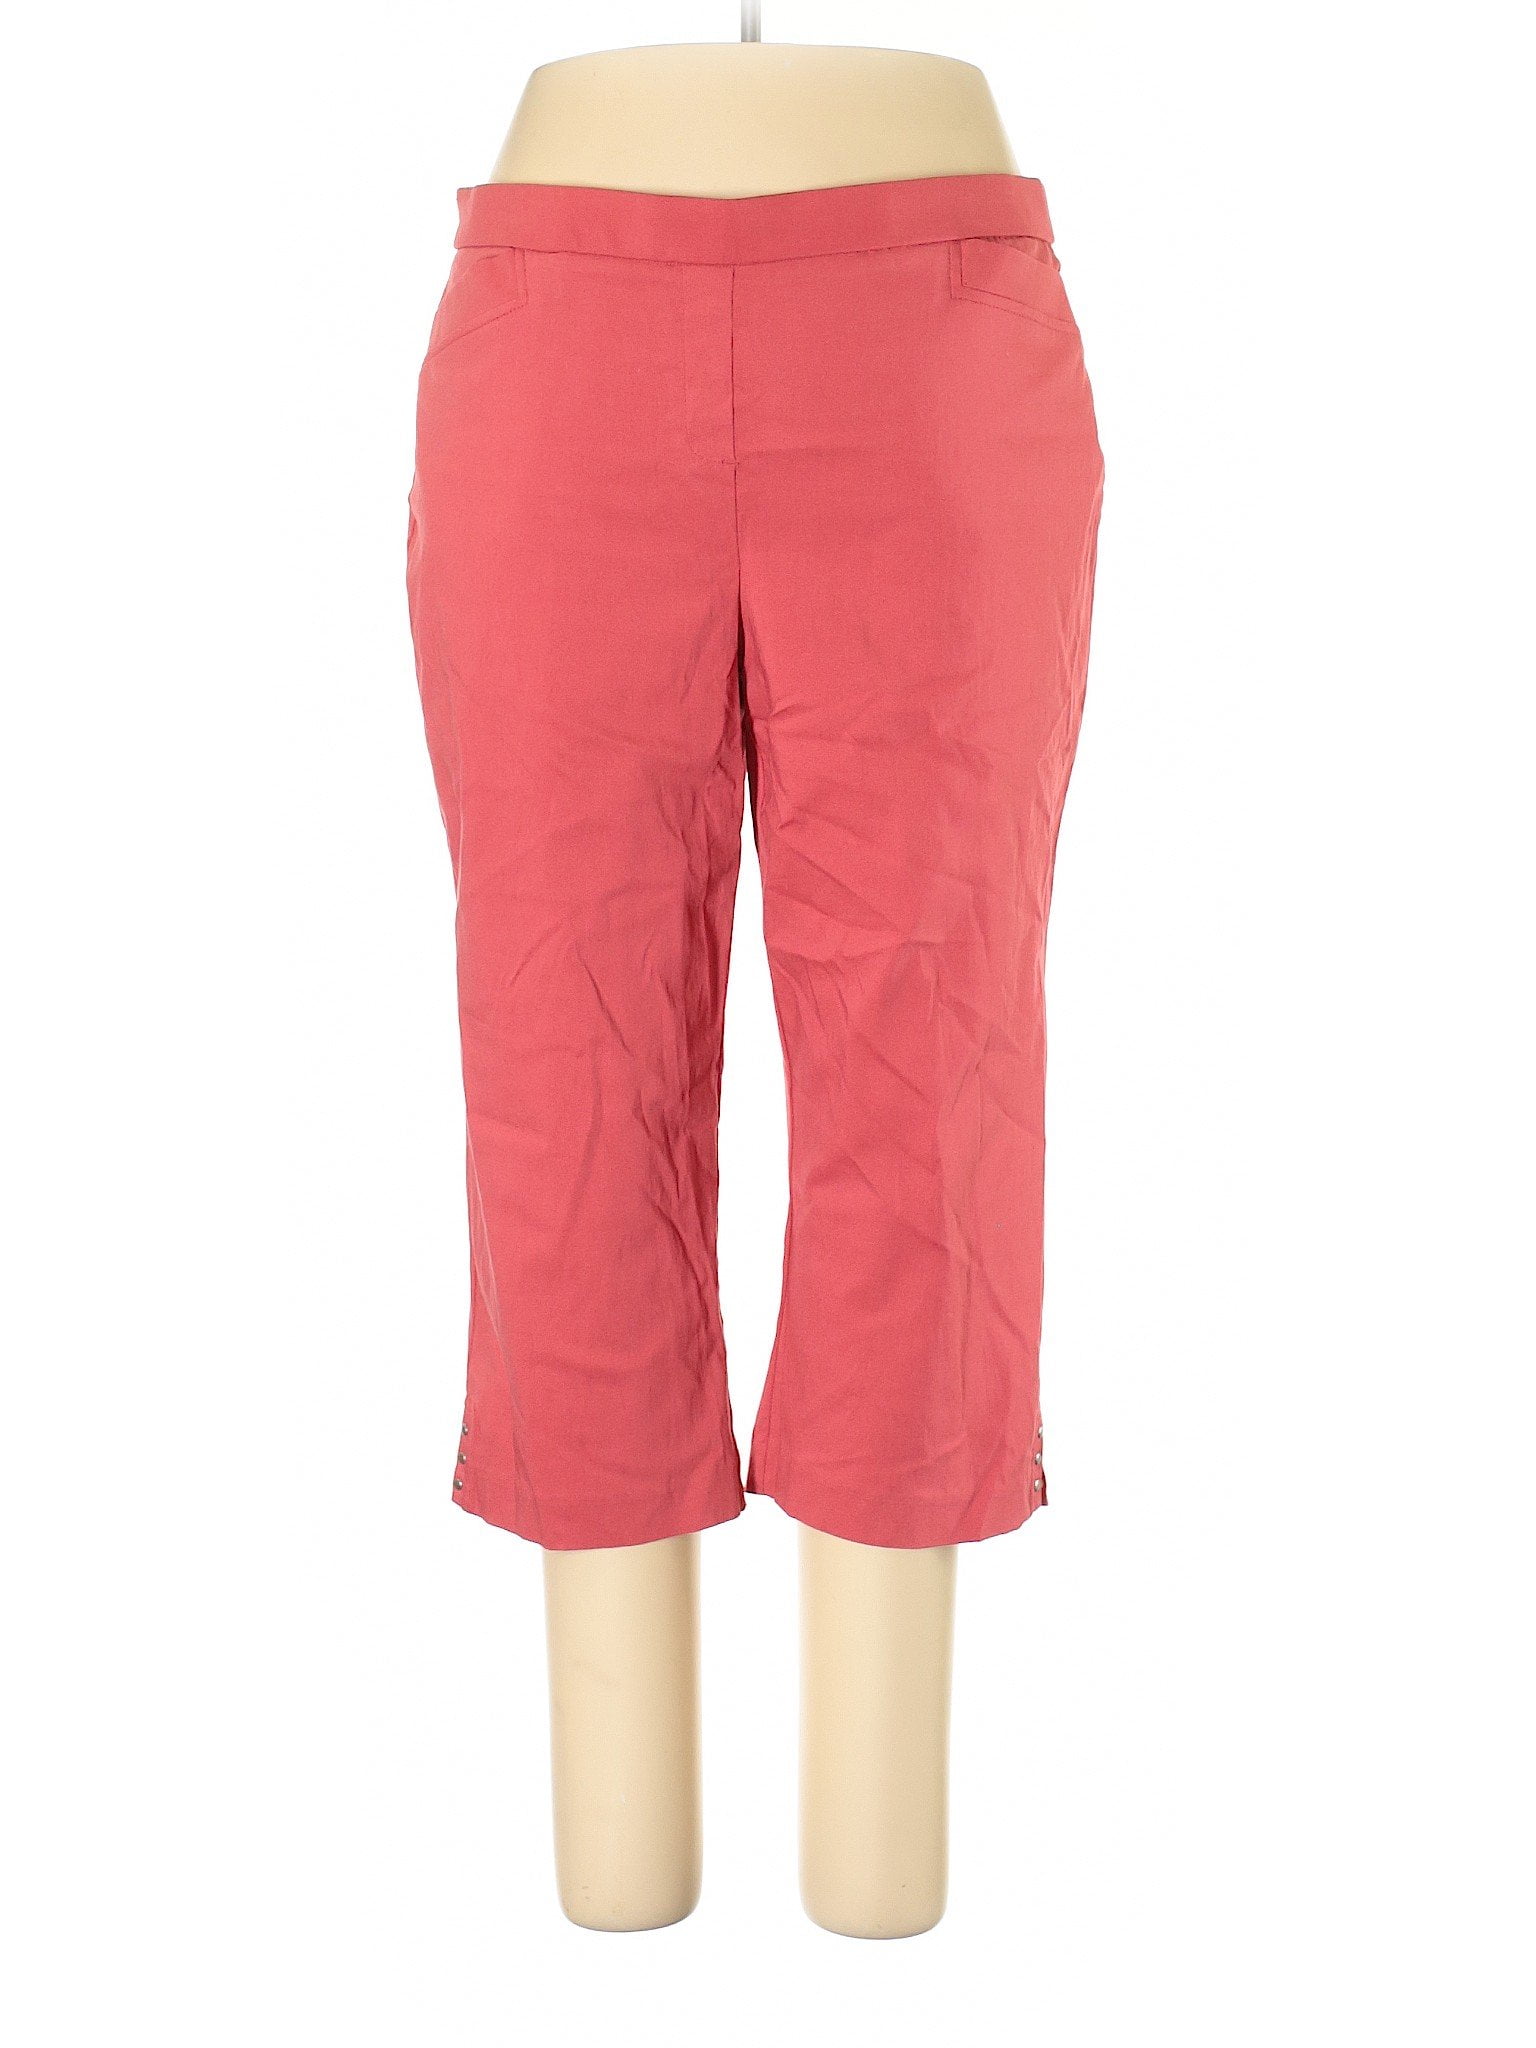 Prophecy Wines - Pre-Owned Prophecy Women's Size 16 Casual Pants ...